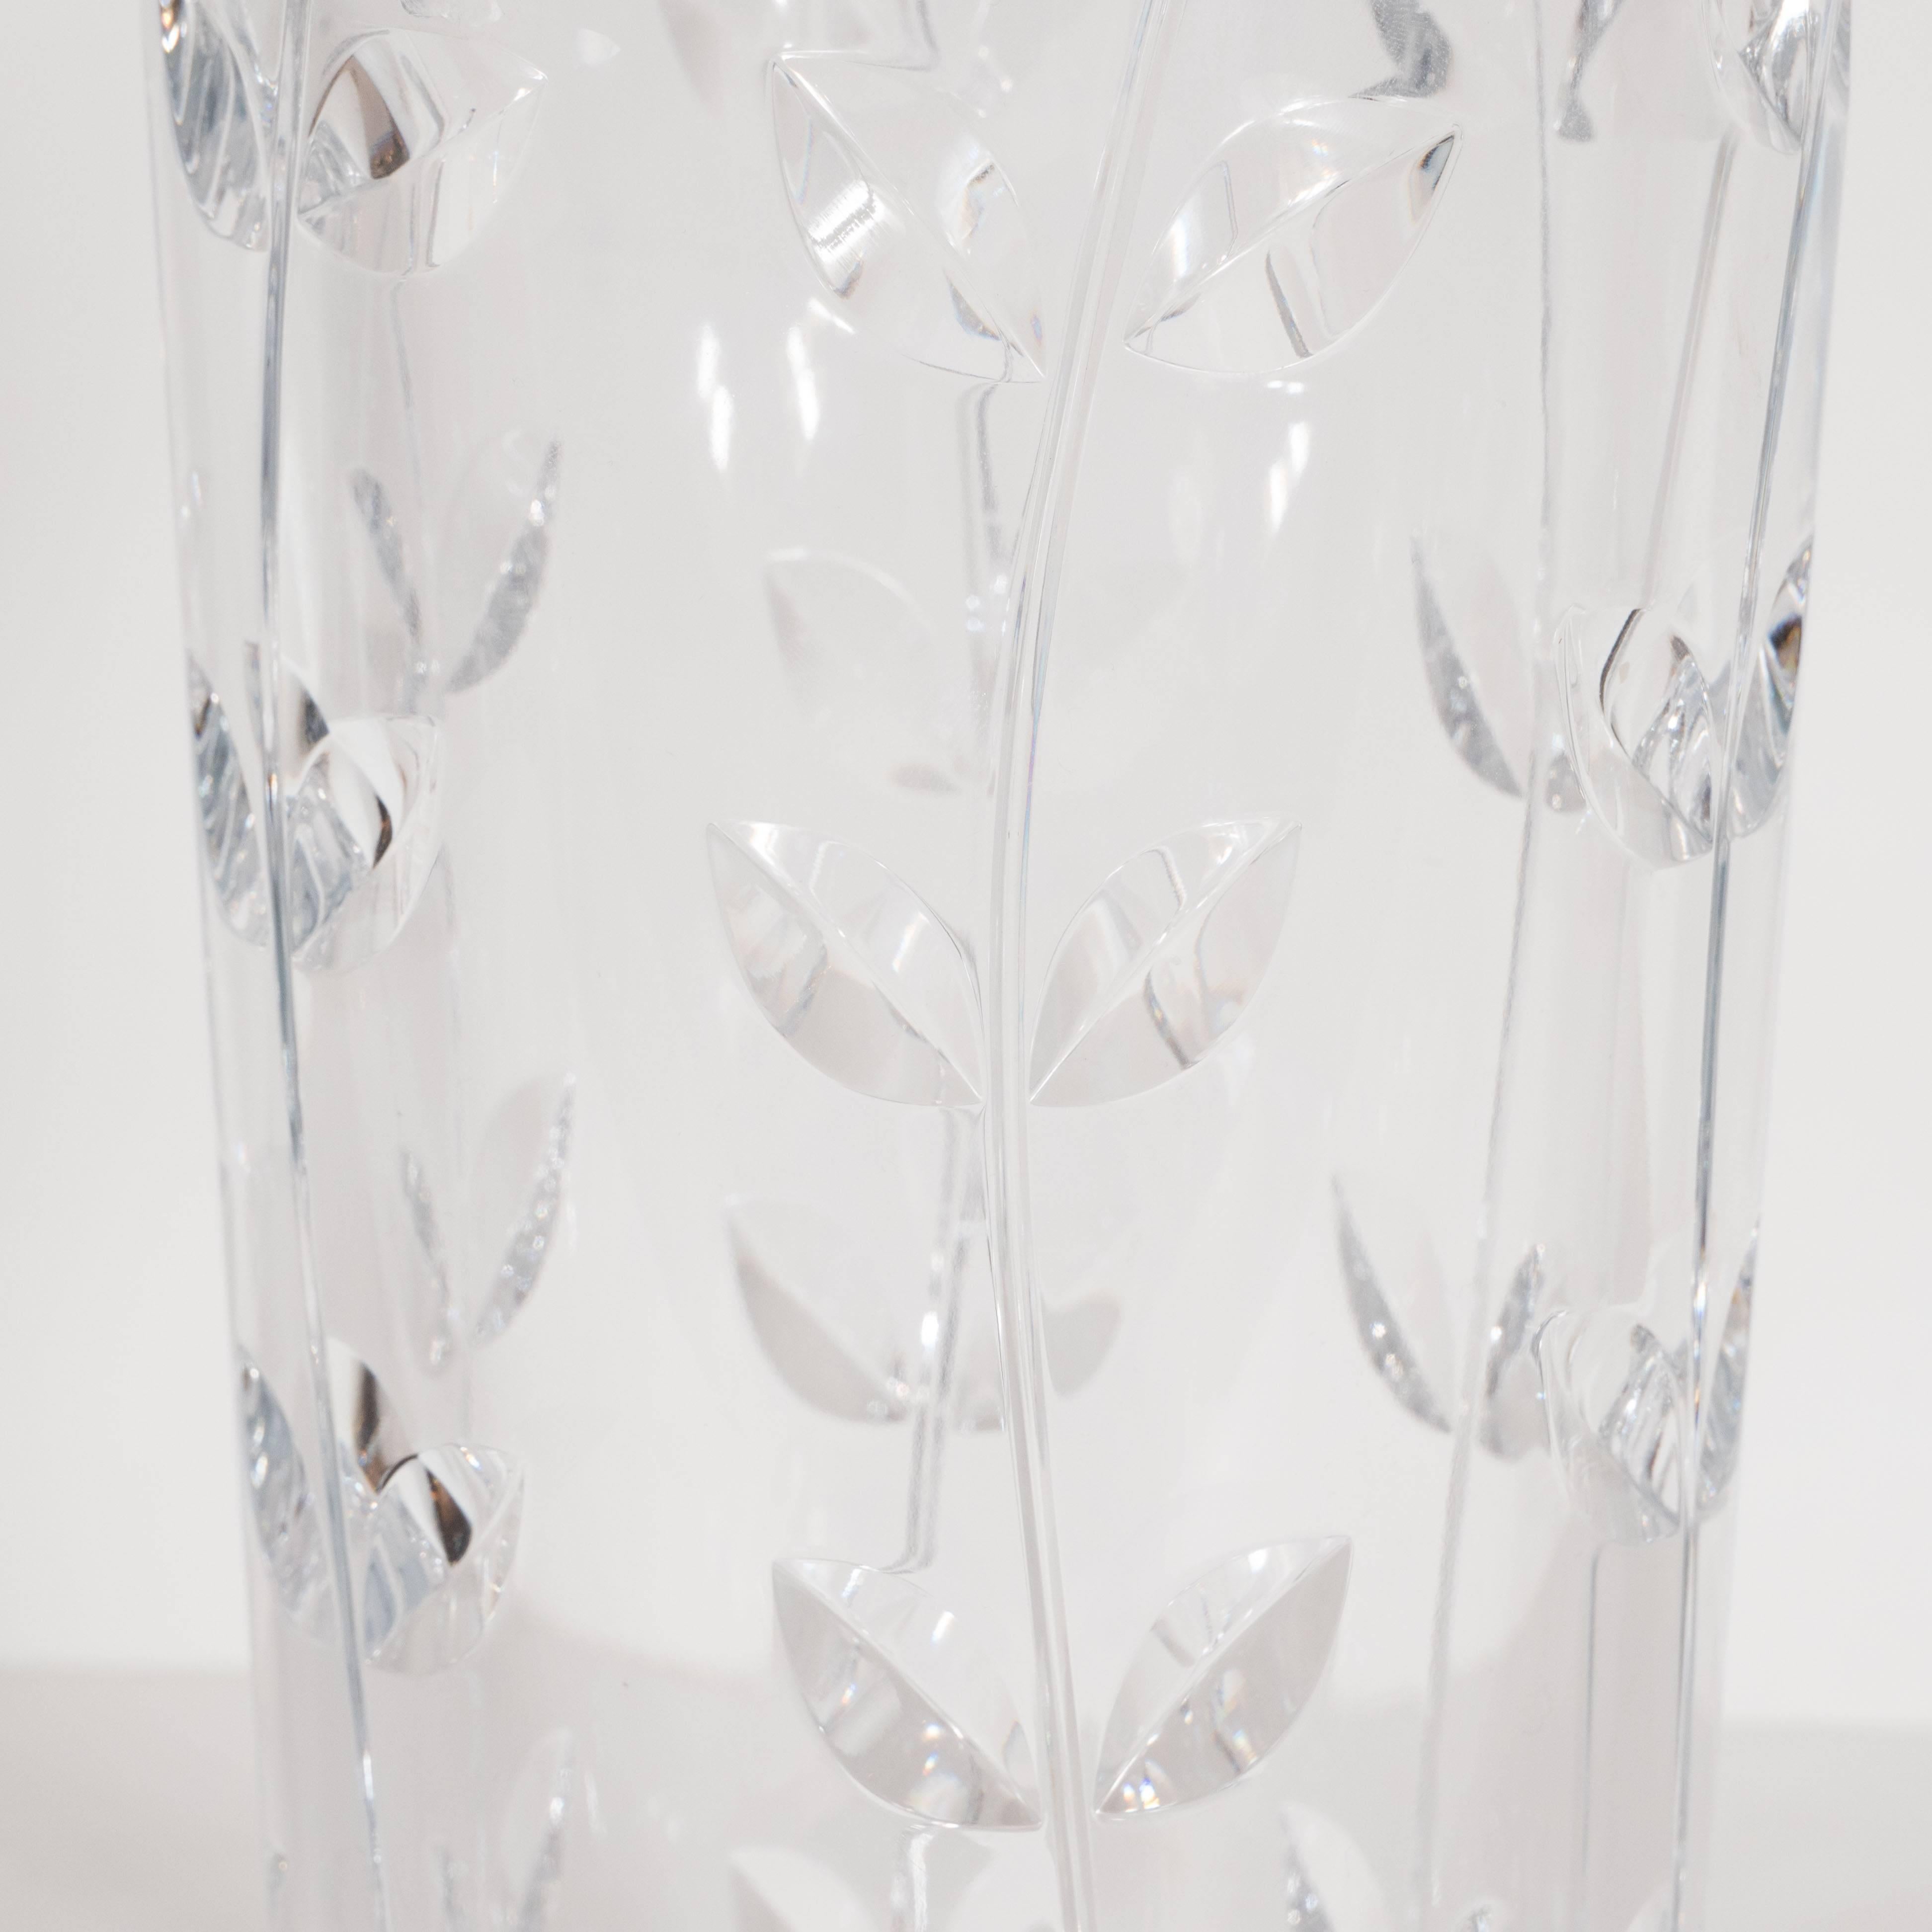 20th Century Large Modernist Crystal Vase with Incised Foliate Patterns by Tiffany & Co.